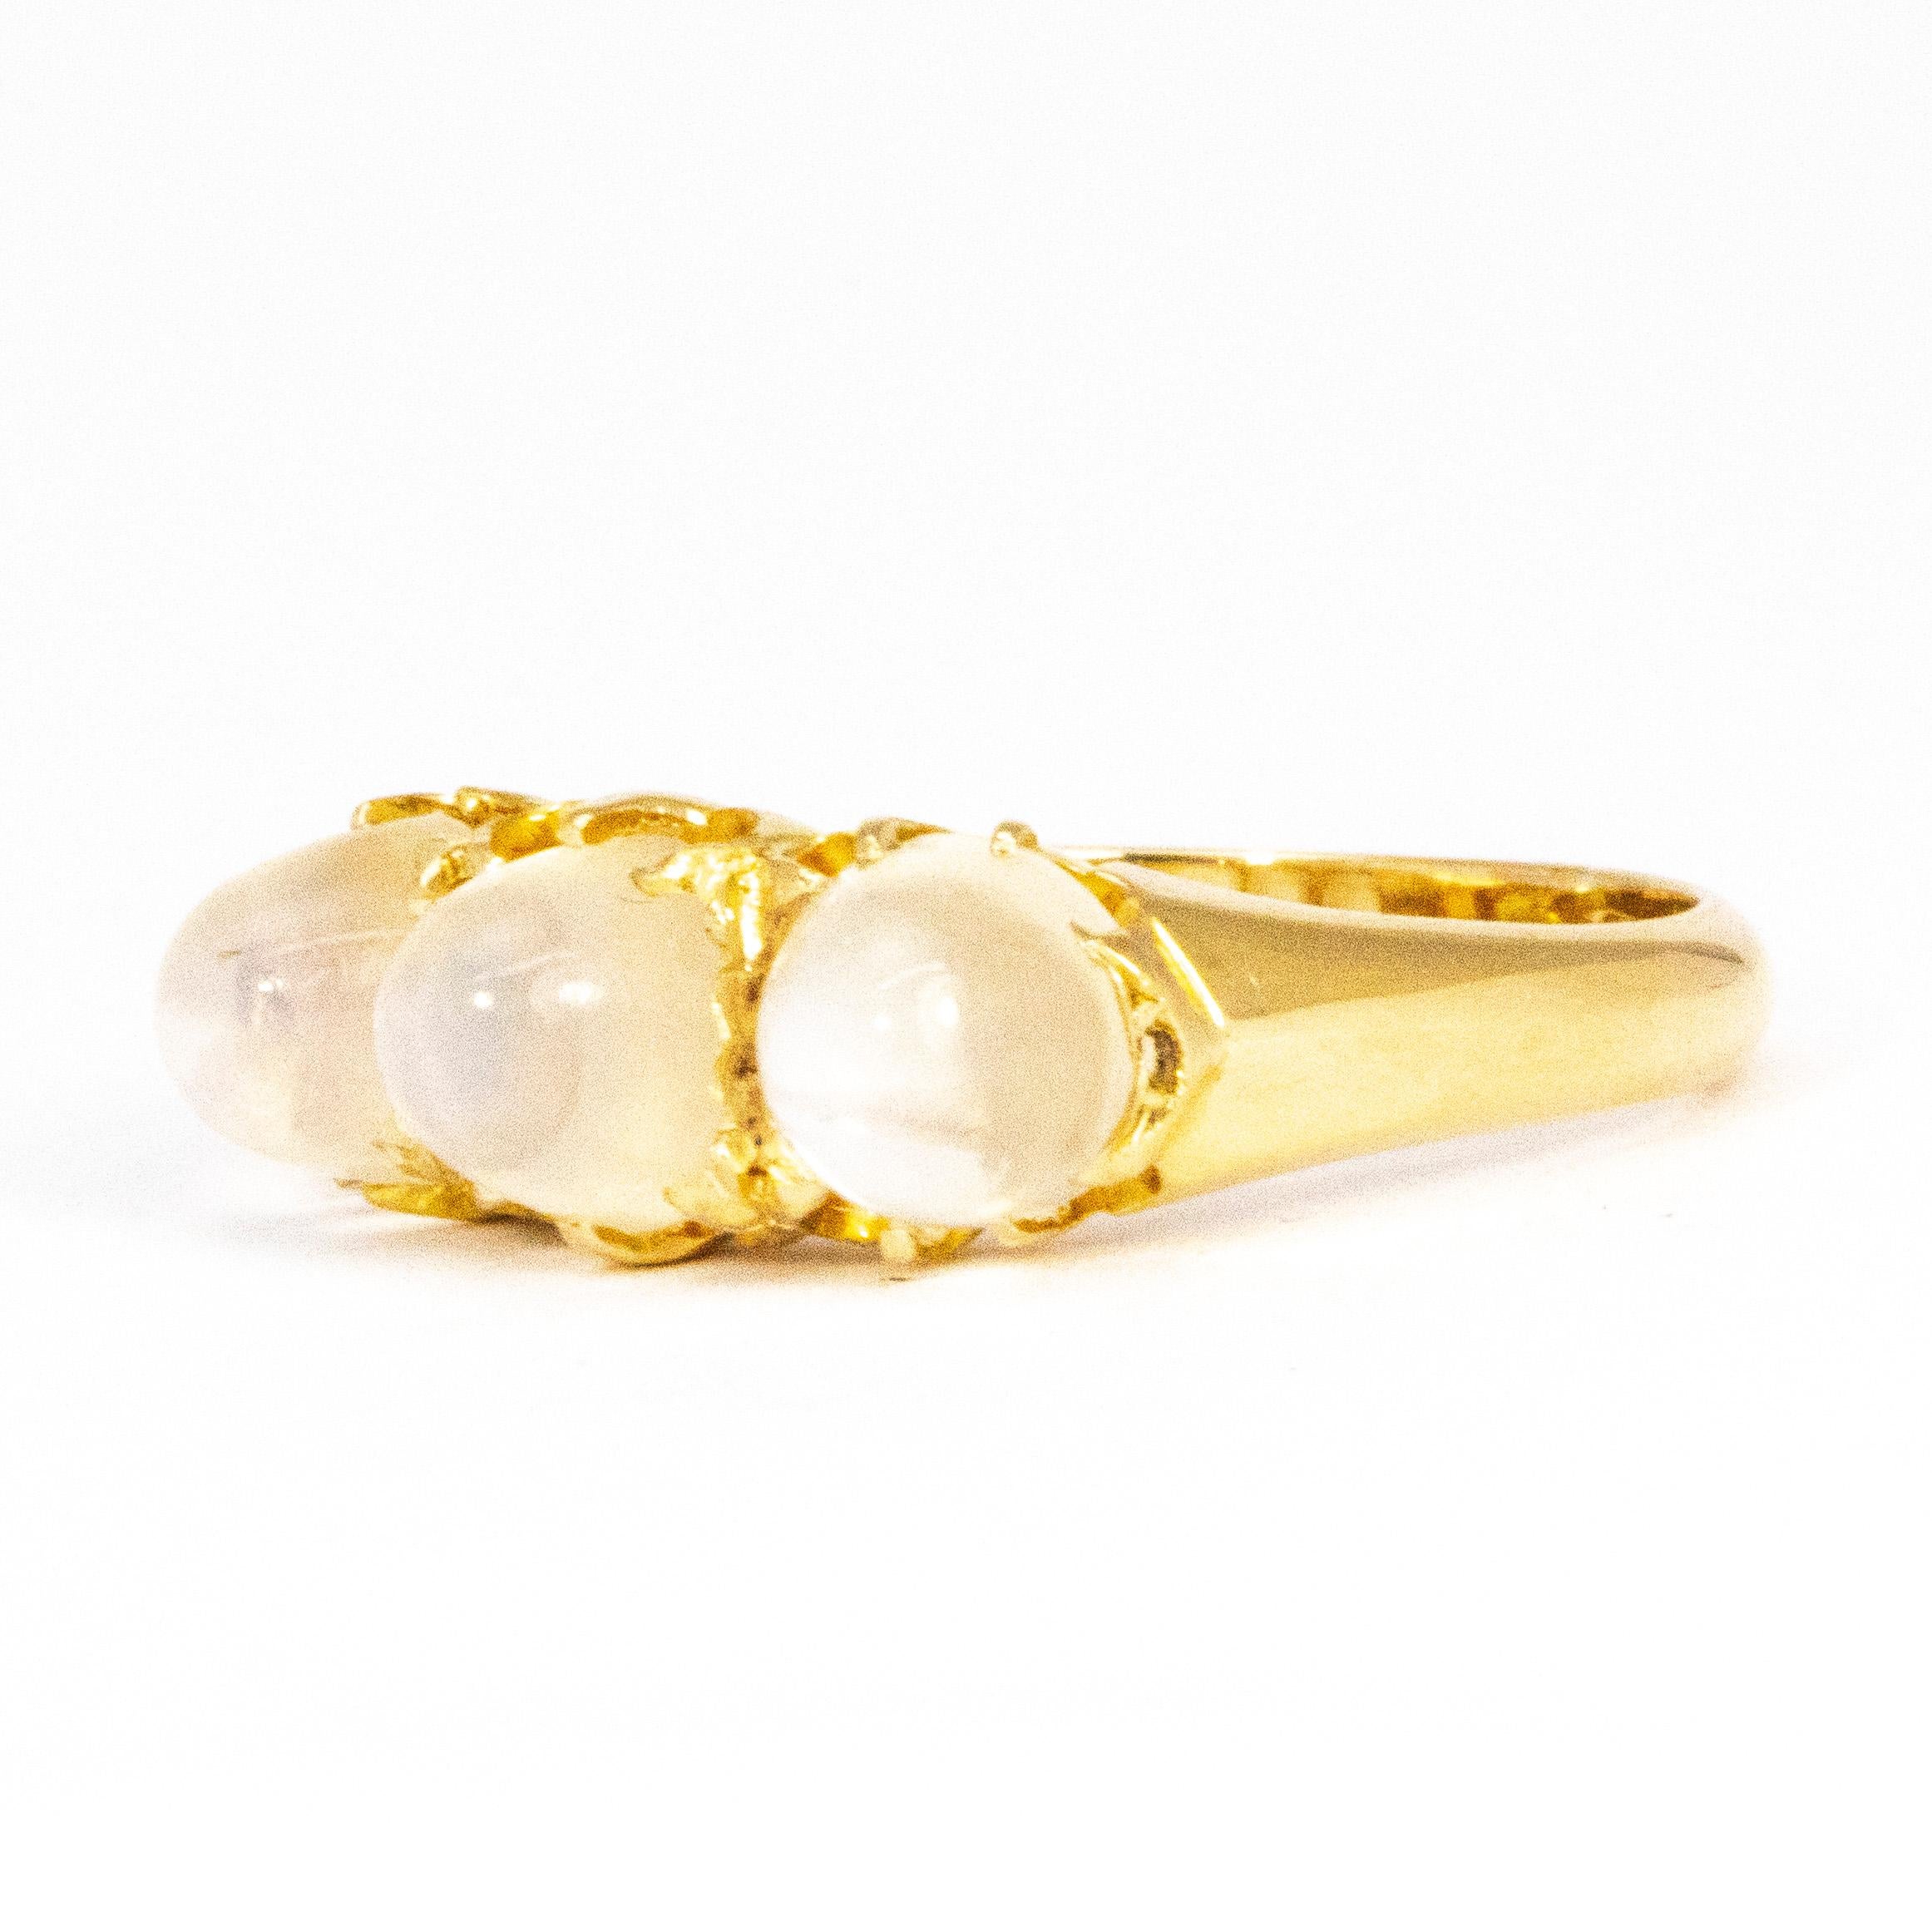 Sat in this glossy 18carat gold band are three gorgeous sugarloaf moonstones. The settings are simple claw settings so thy do not take away from the stones themselves. 

Ring Size: N or 6 1/2 
Height Off Finger: 7mm 
Band Width: 6.5mm 
